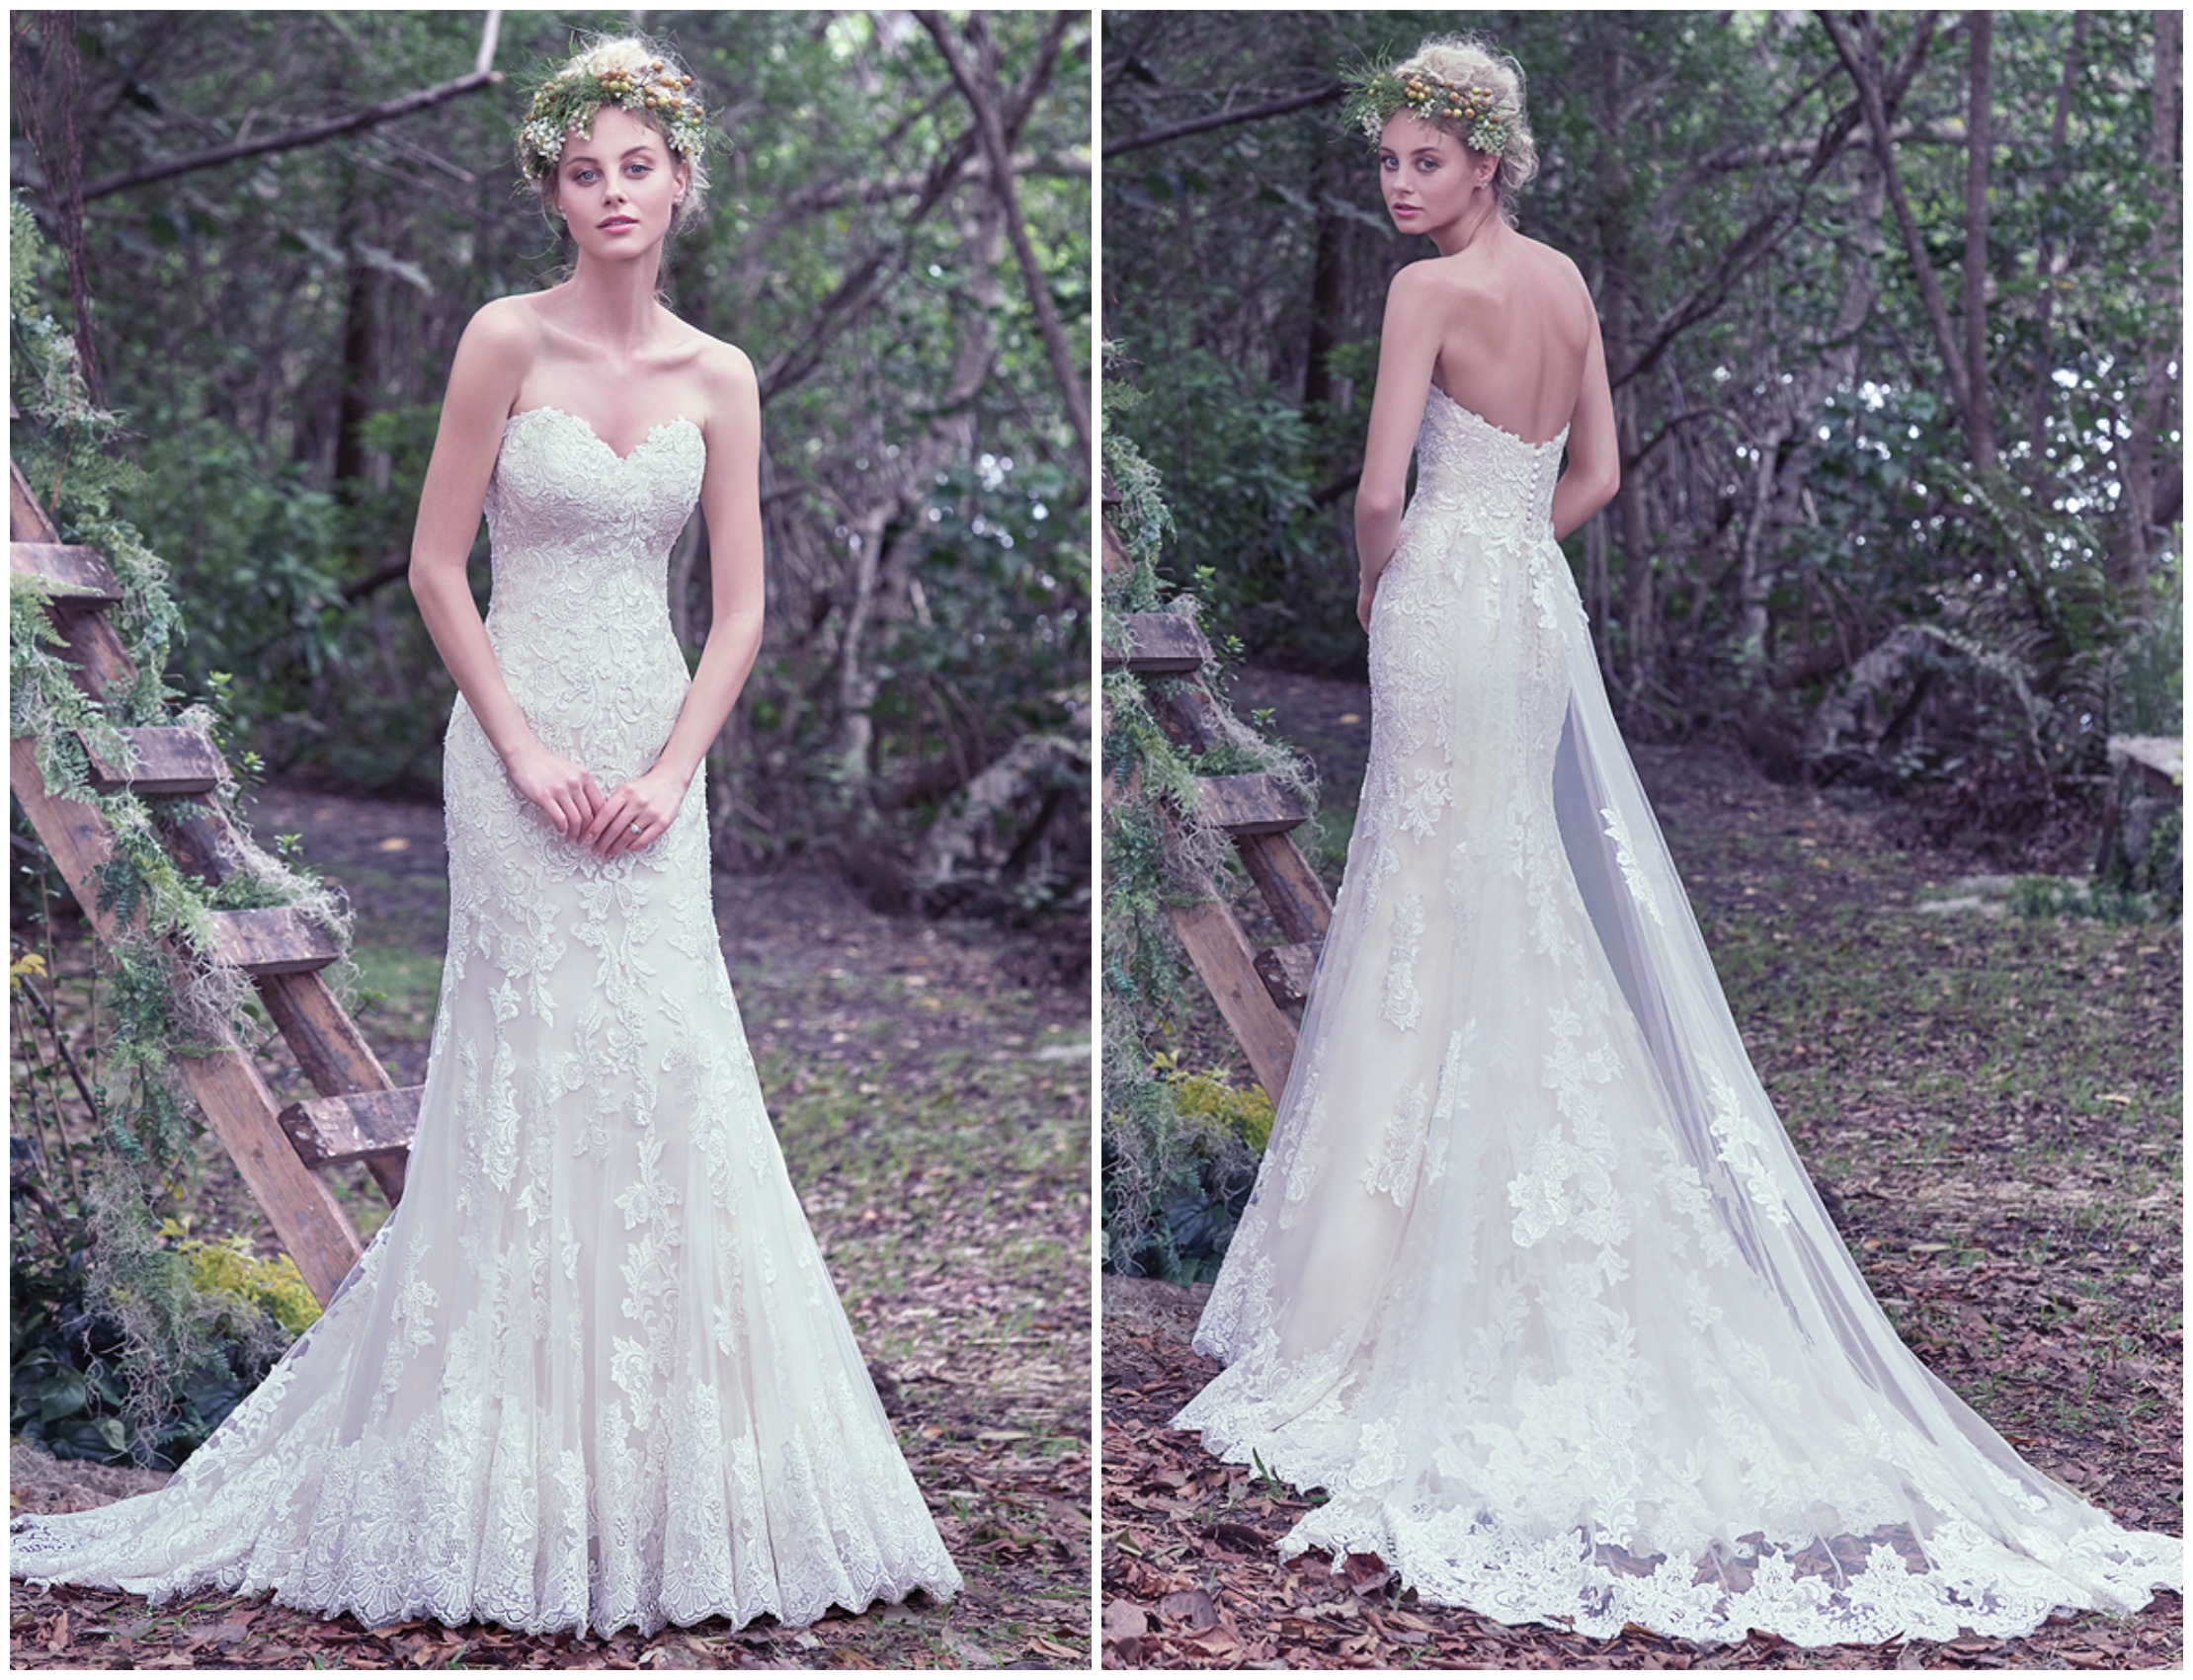 This fit and flare wedding dress features hand placed shimmering embroidered lace appliqués on tulle and a sweetheart neckline. Complete with covered buttons over zipper and inner corset closure. Detachable tulle train with lace sold separately. 

<a href="https://www.maggiesottero.com/maggie-sottero/jennita/9710" target="_blank">Maggie Sottero</a>